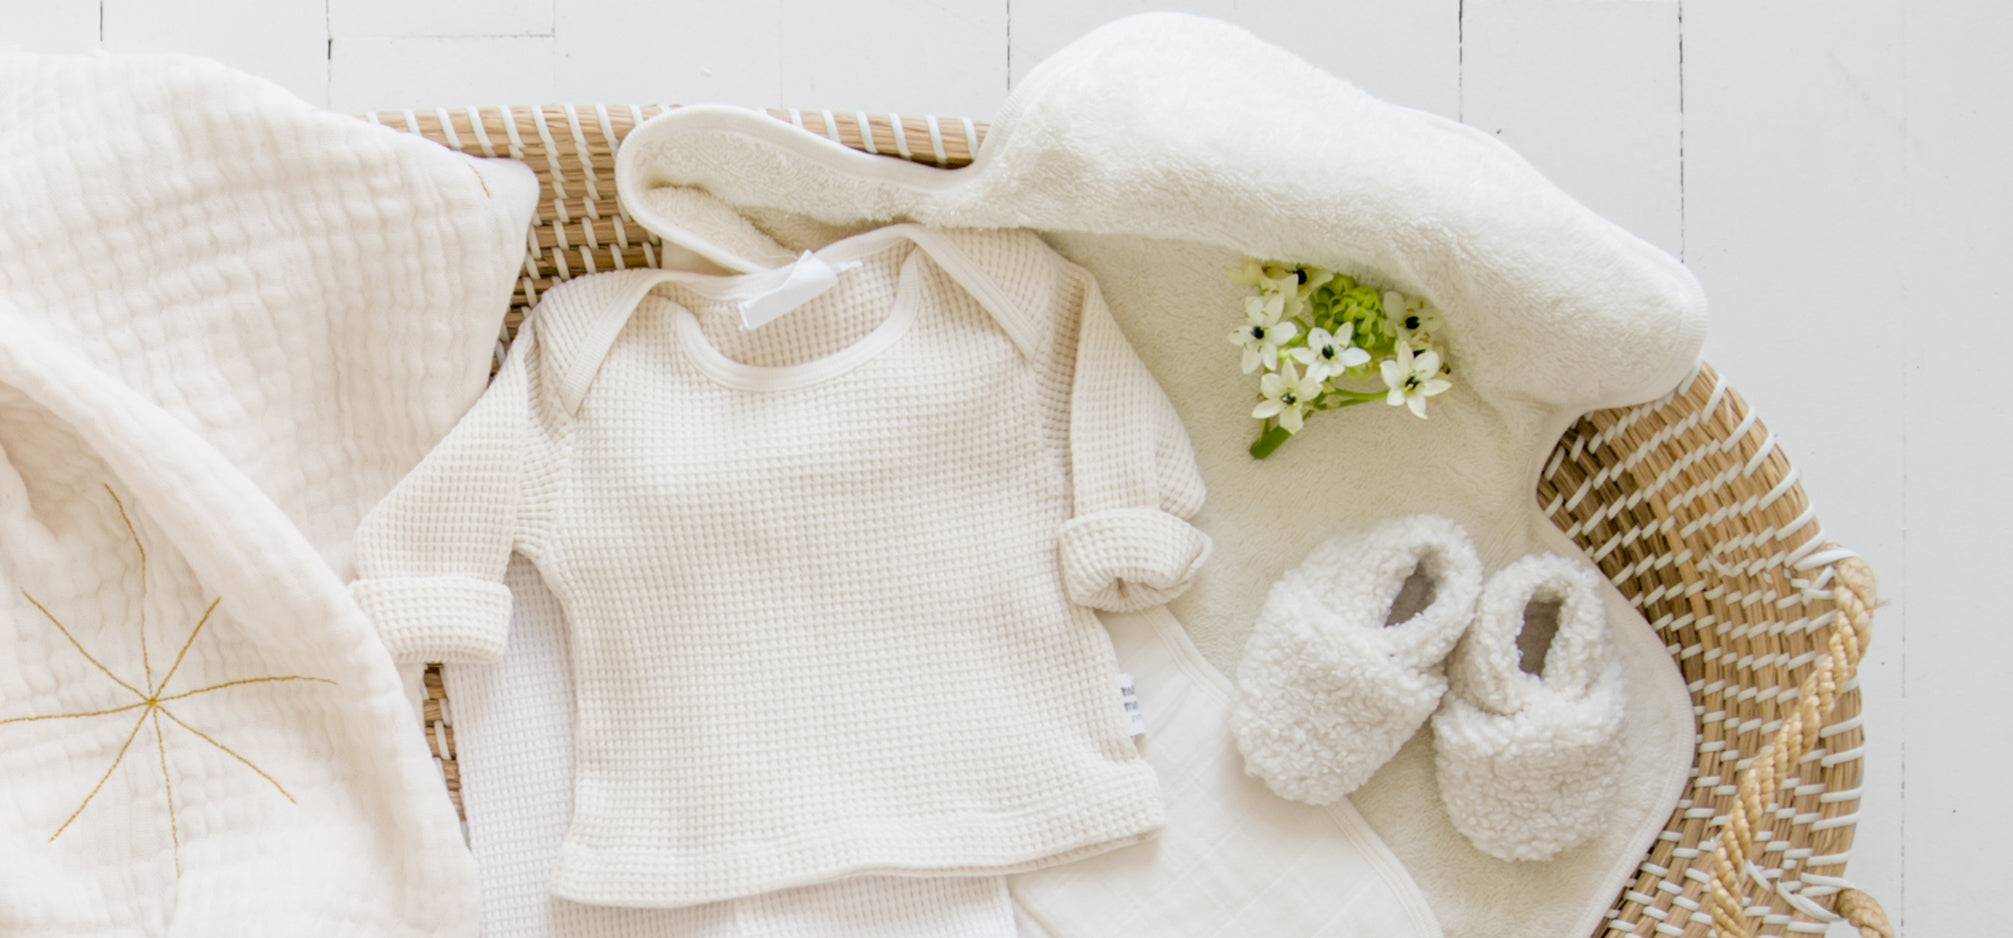 A cream baby outfit and blanket in a seagrass basket.